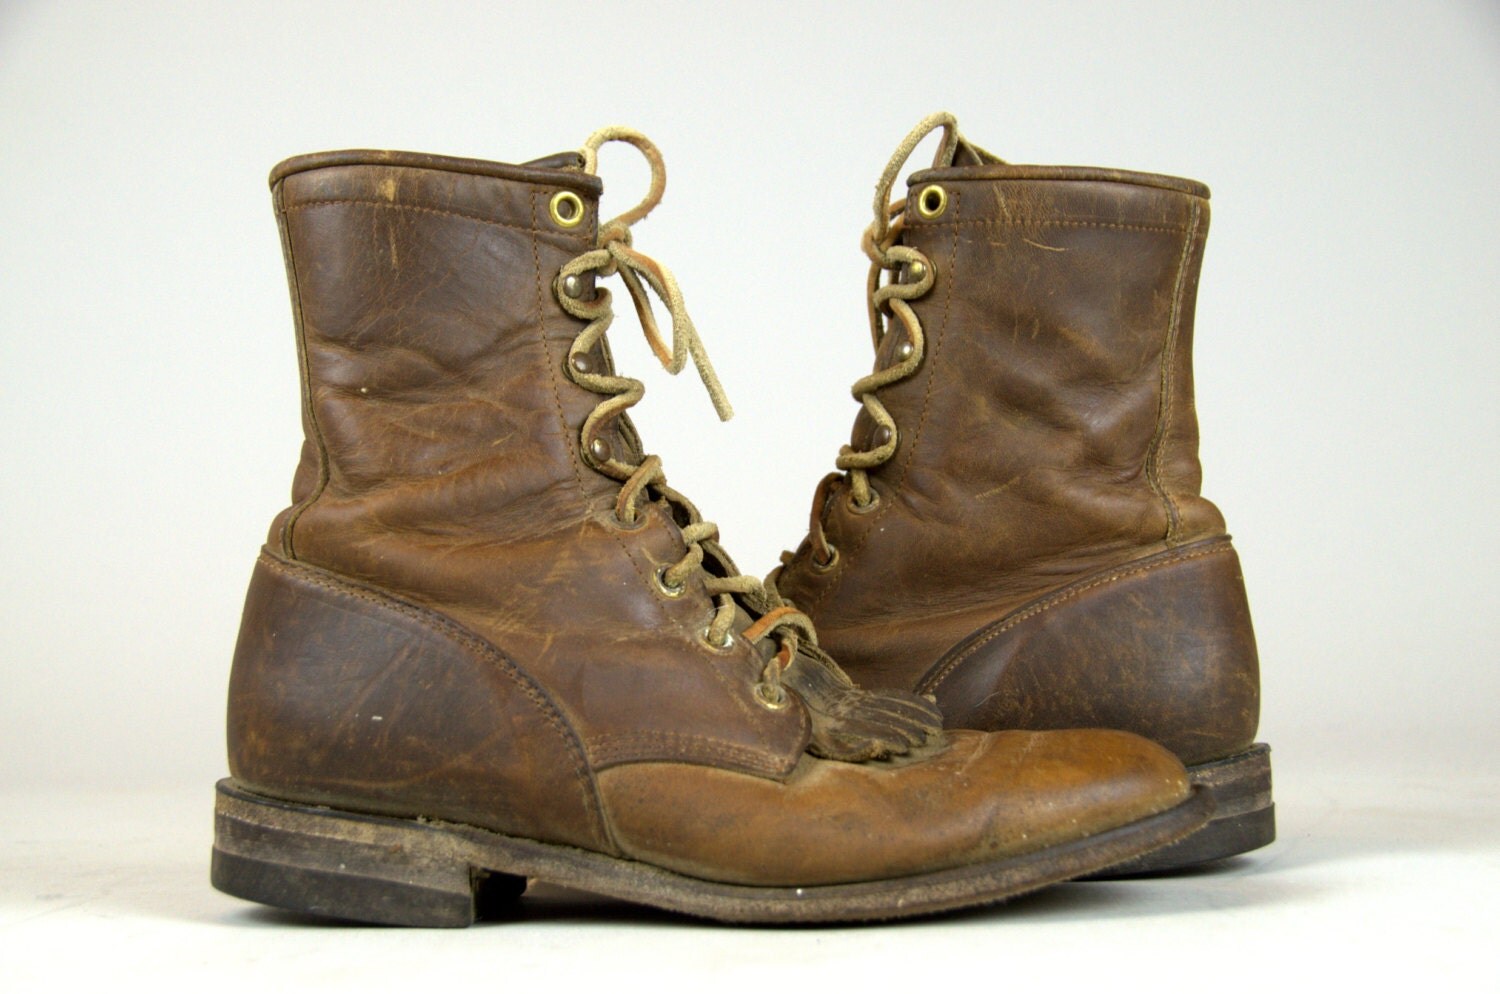 SALE 80s Packer Boots Justin Oiled Leather Packer Roper Riding